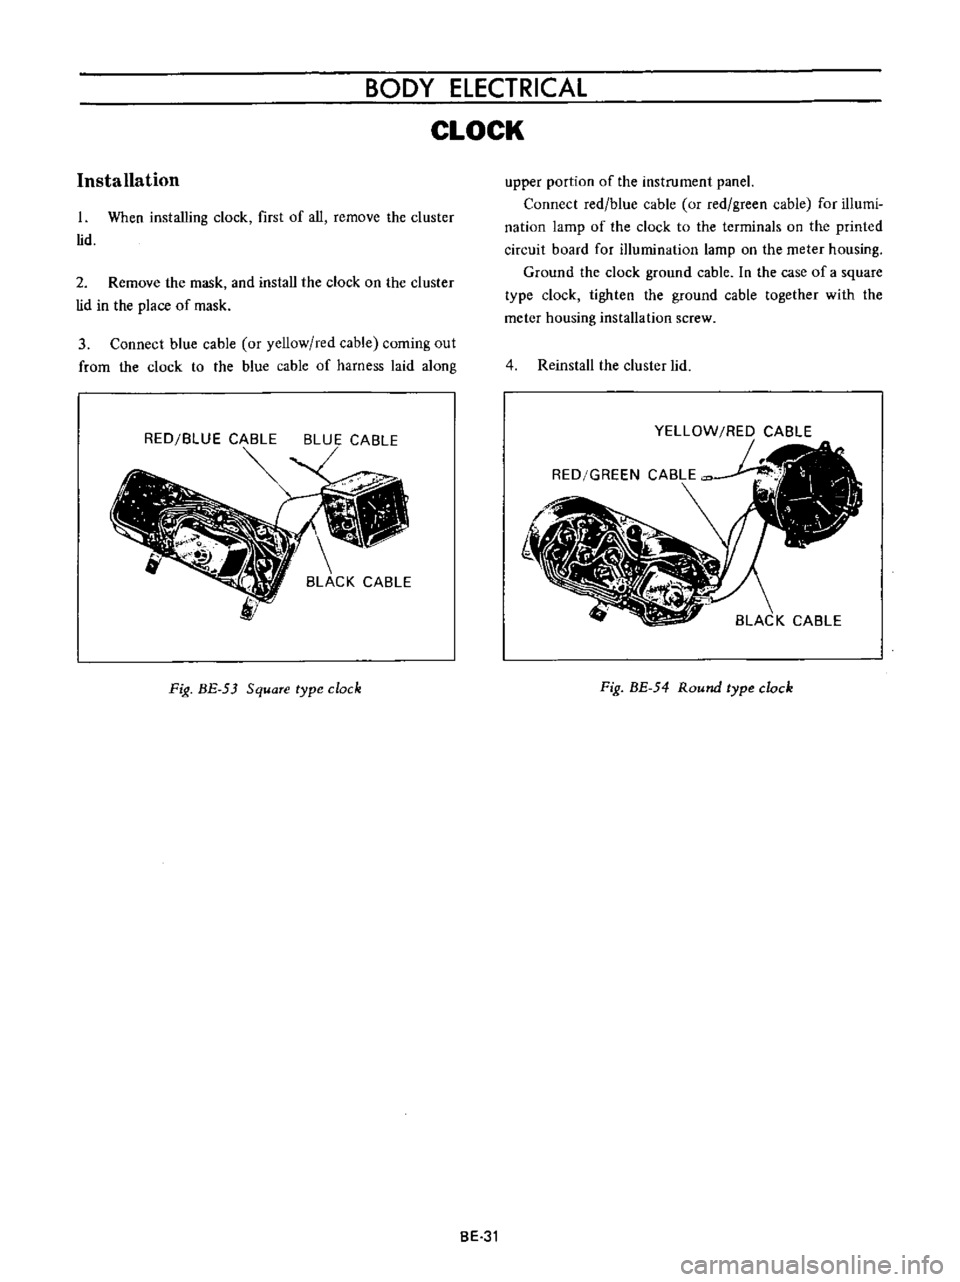 DATSUN B110 1973  Service Repair Manual 
BODY 
ELECTRICAL

CLOCK

Installation

upper 
portion 
of 
the

instrument

panel

Connect 
red

blue 
cable 
or 
red

green 
cable 
for 
illumi

nation

lamp 
of 
the

clock 
to 
the 
terminals 
on 